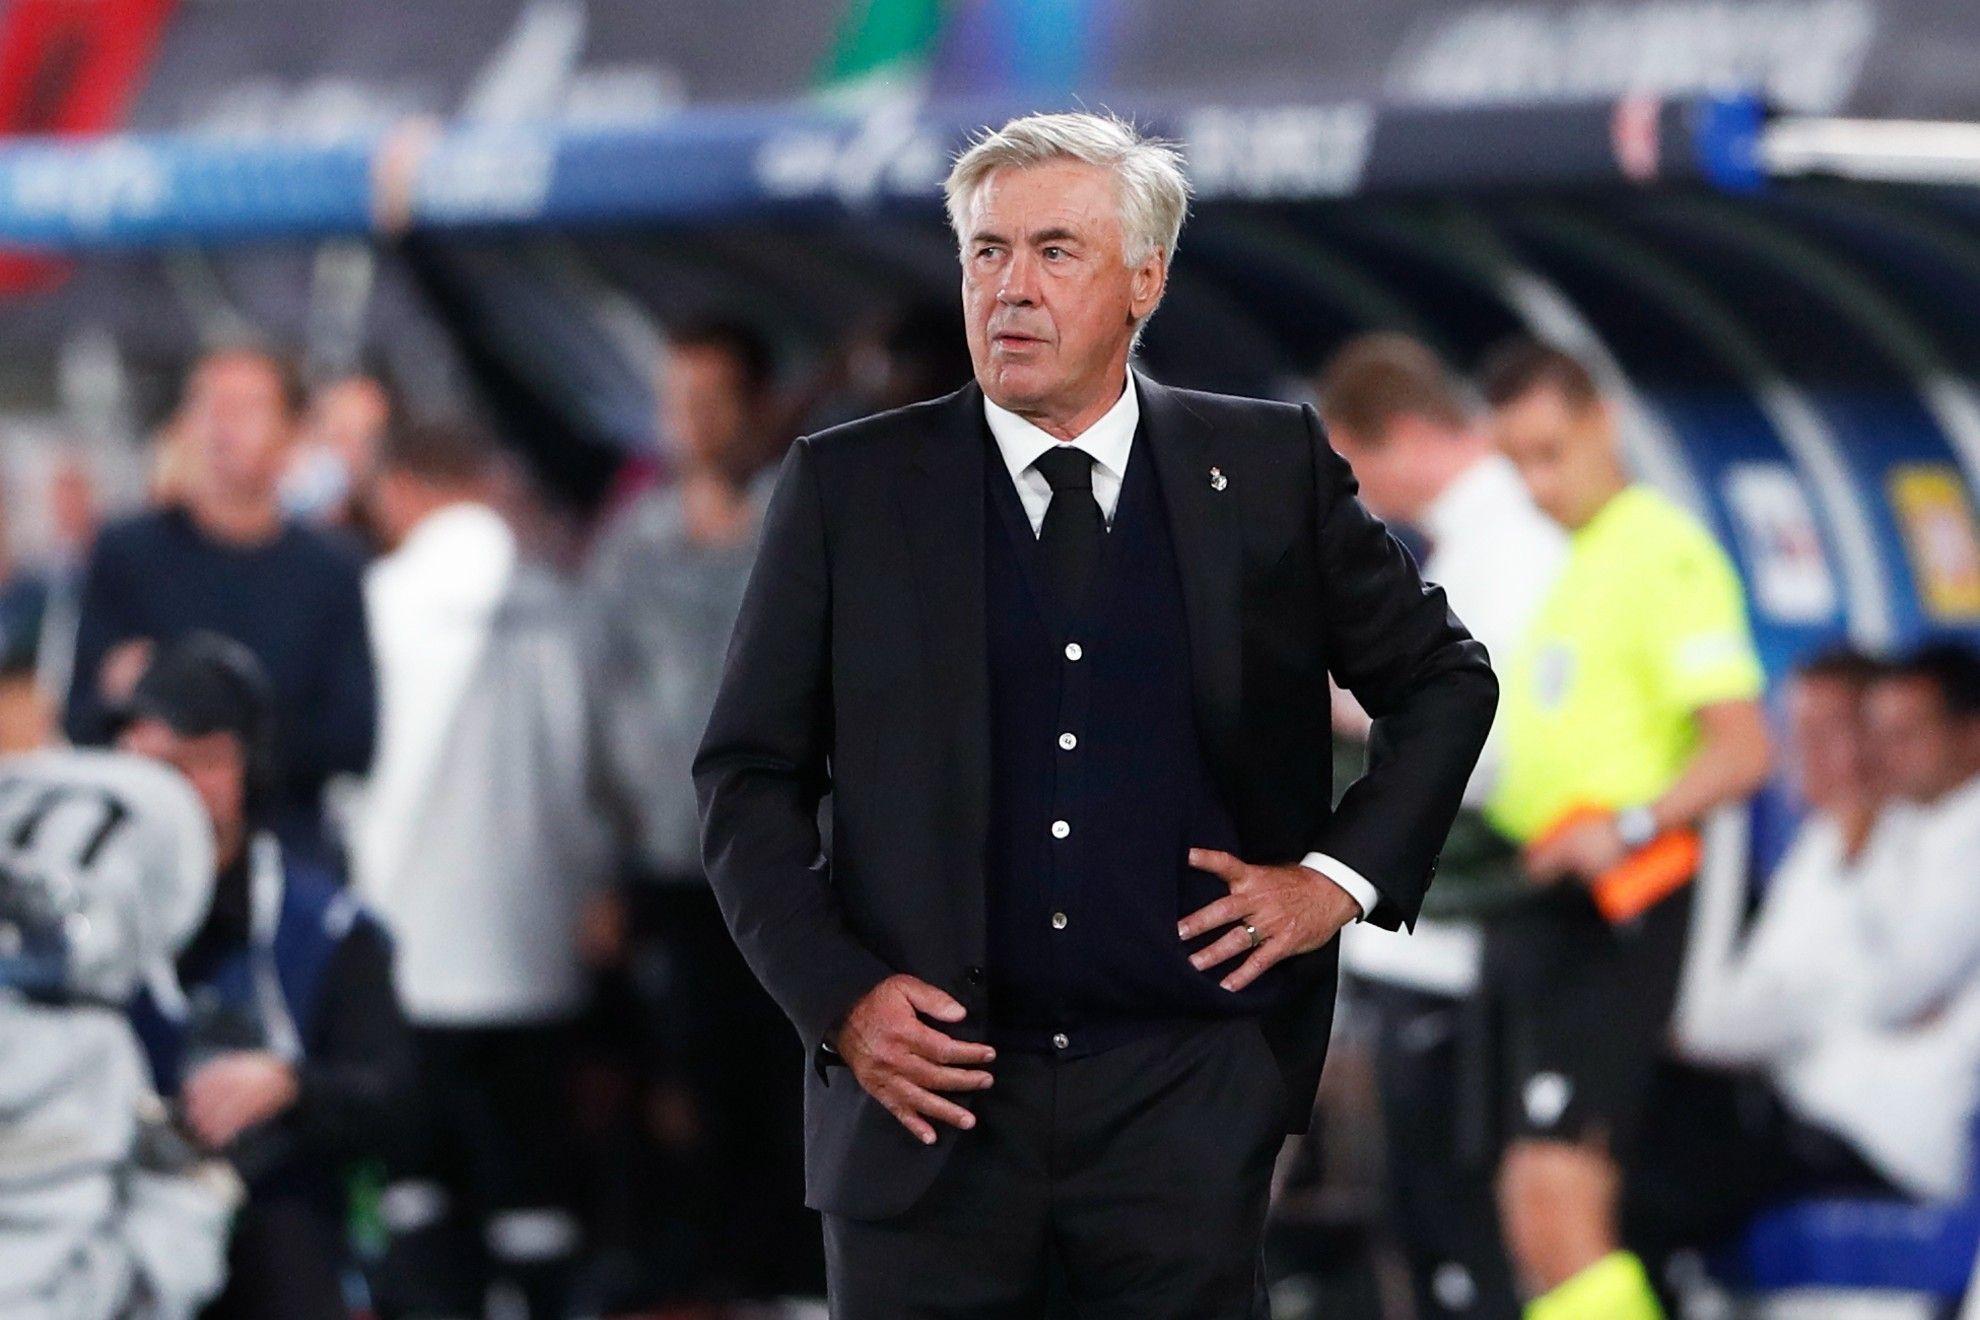 Real Madrid coach Ancelotti to face to tax evasion trial